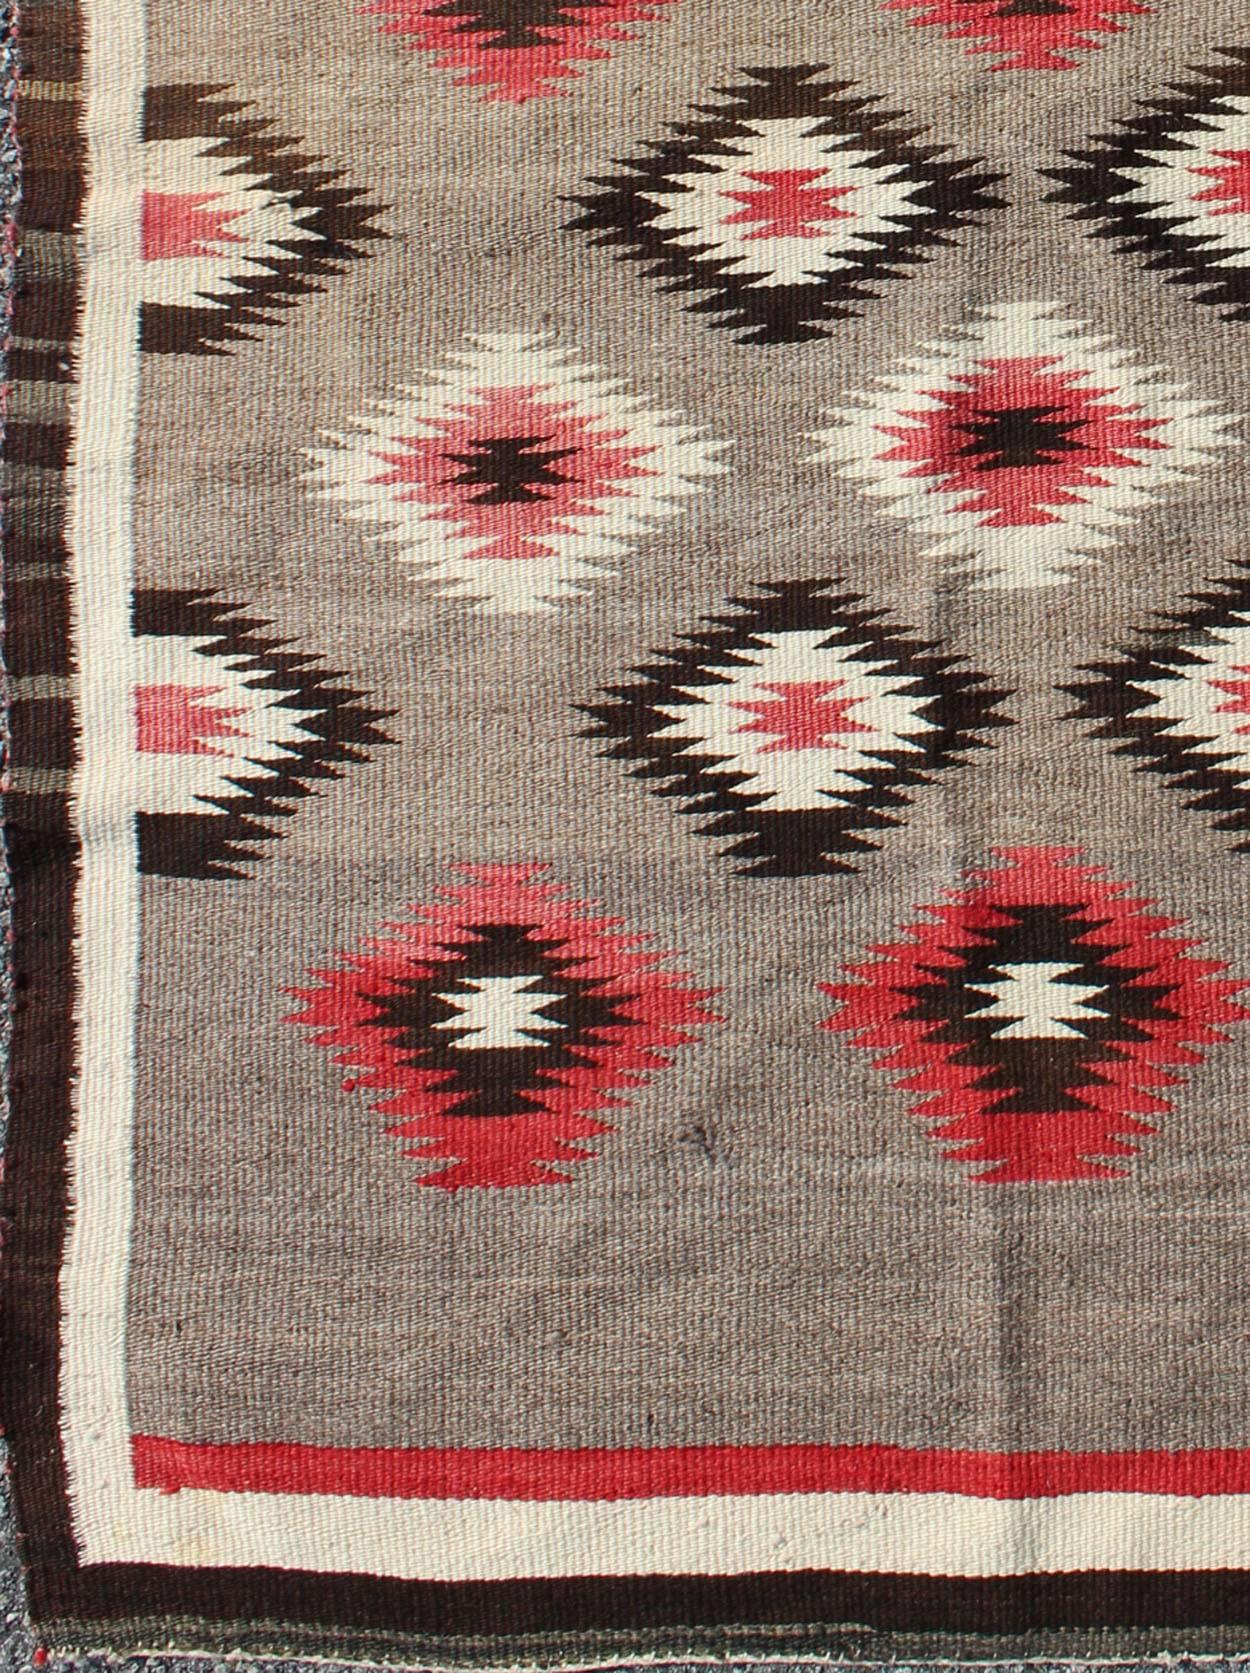 Measures: 3'0'' x 4'10''.
This intriguing vintage Navajo rug was woven in the United States during the first half of the 20th century. The exciting and unique composition boasts a captivating geometric composition with an all-over diamond design.